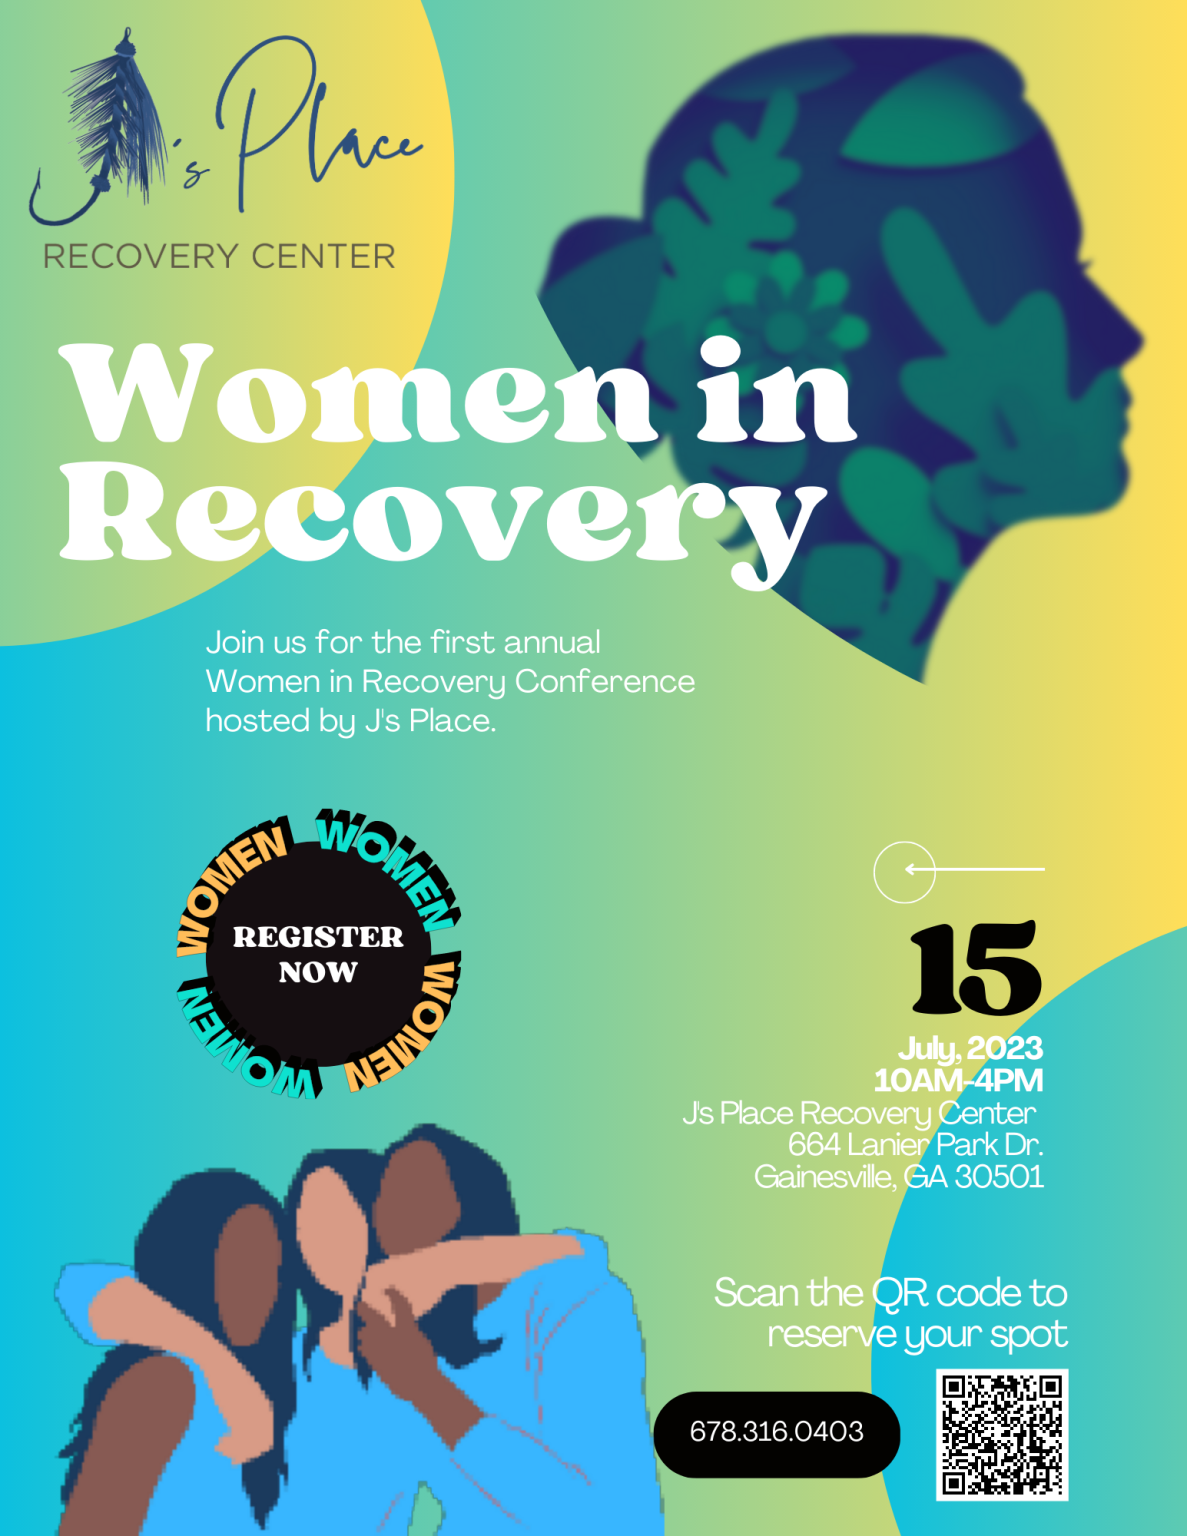 Women in Recovery Conference July 15, 2023 J's Place Recovery Center